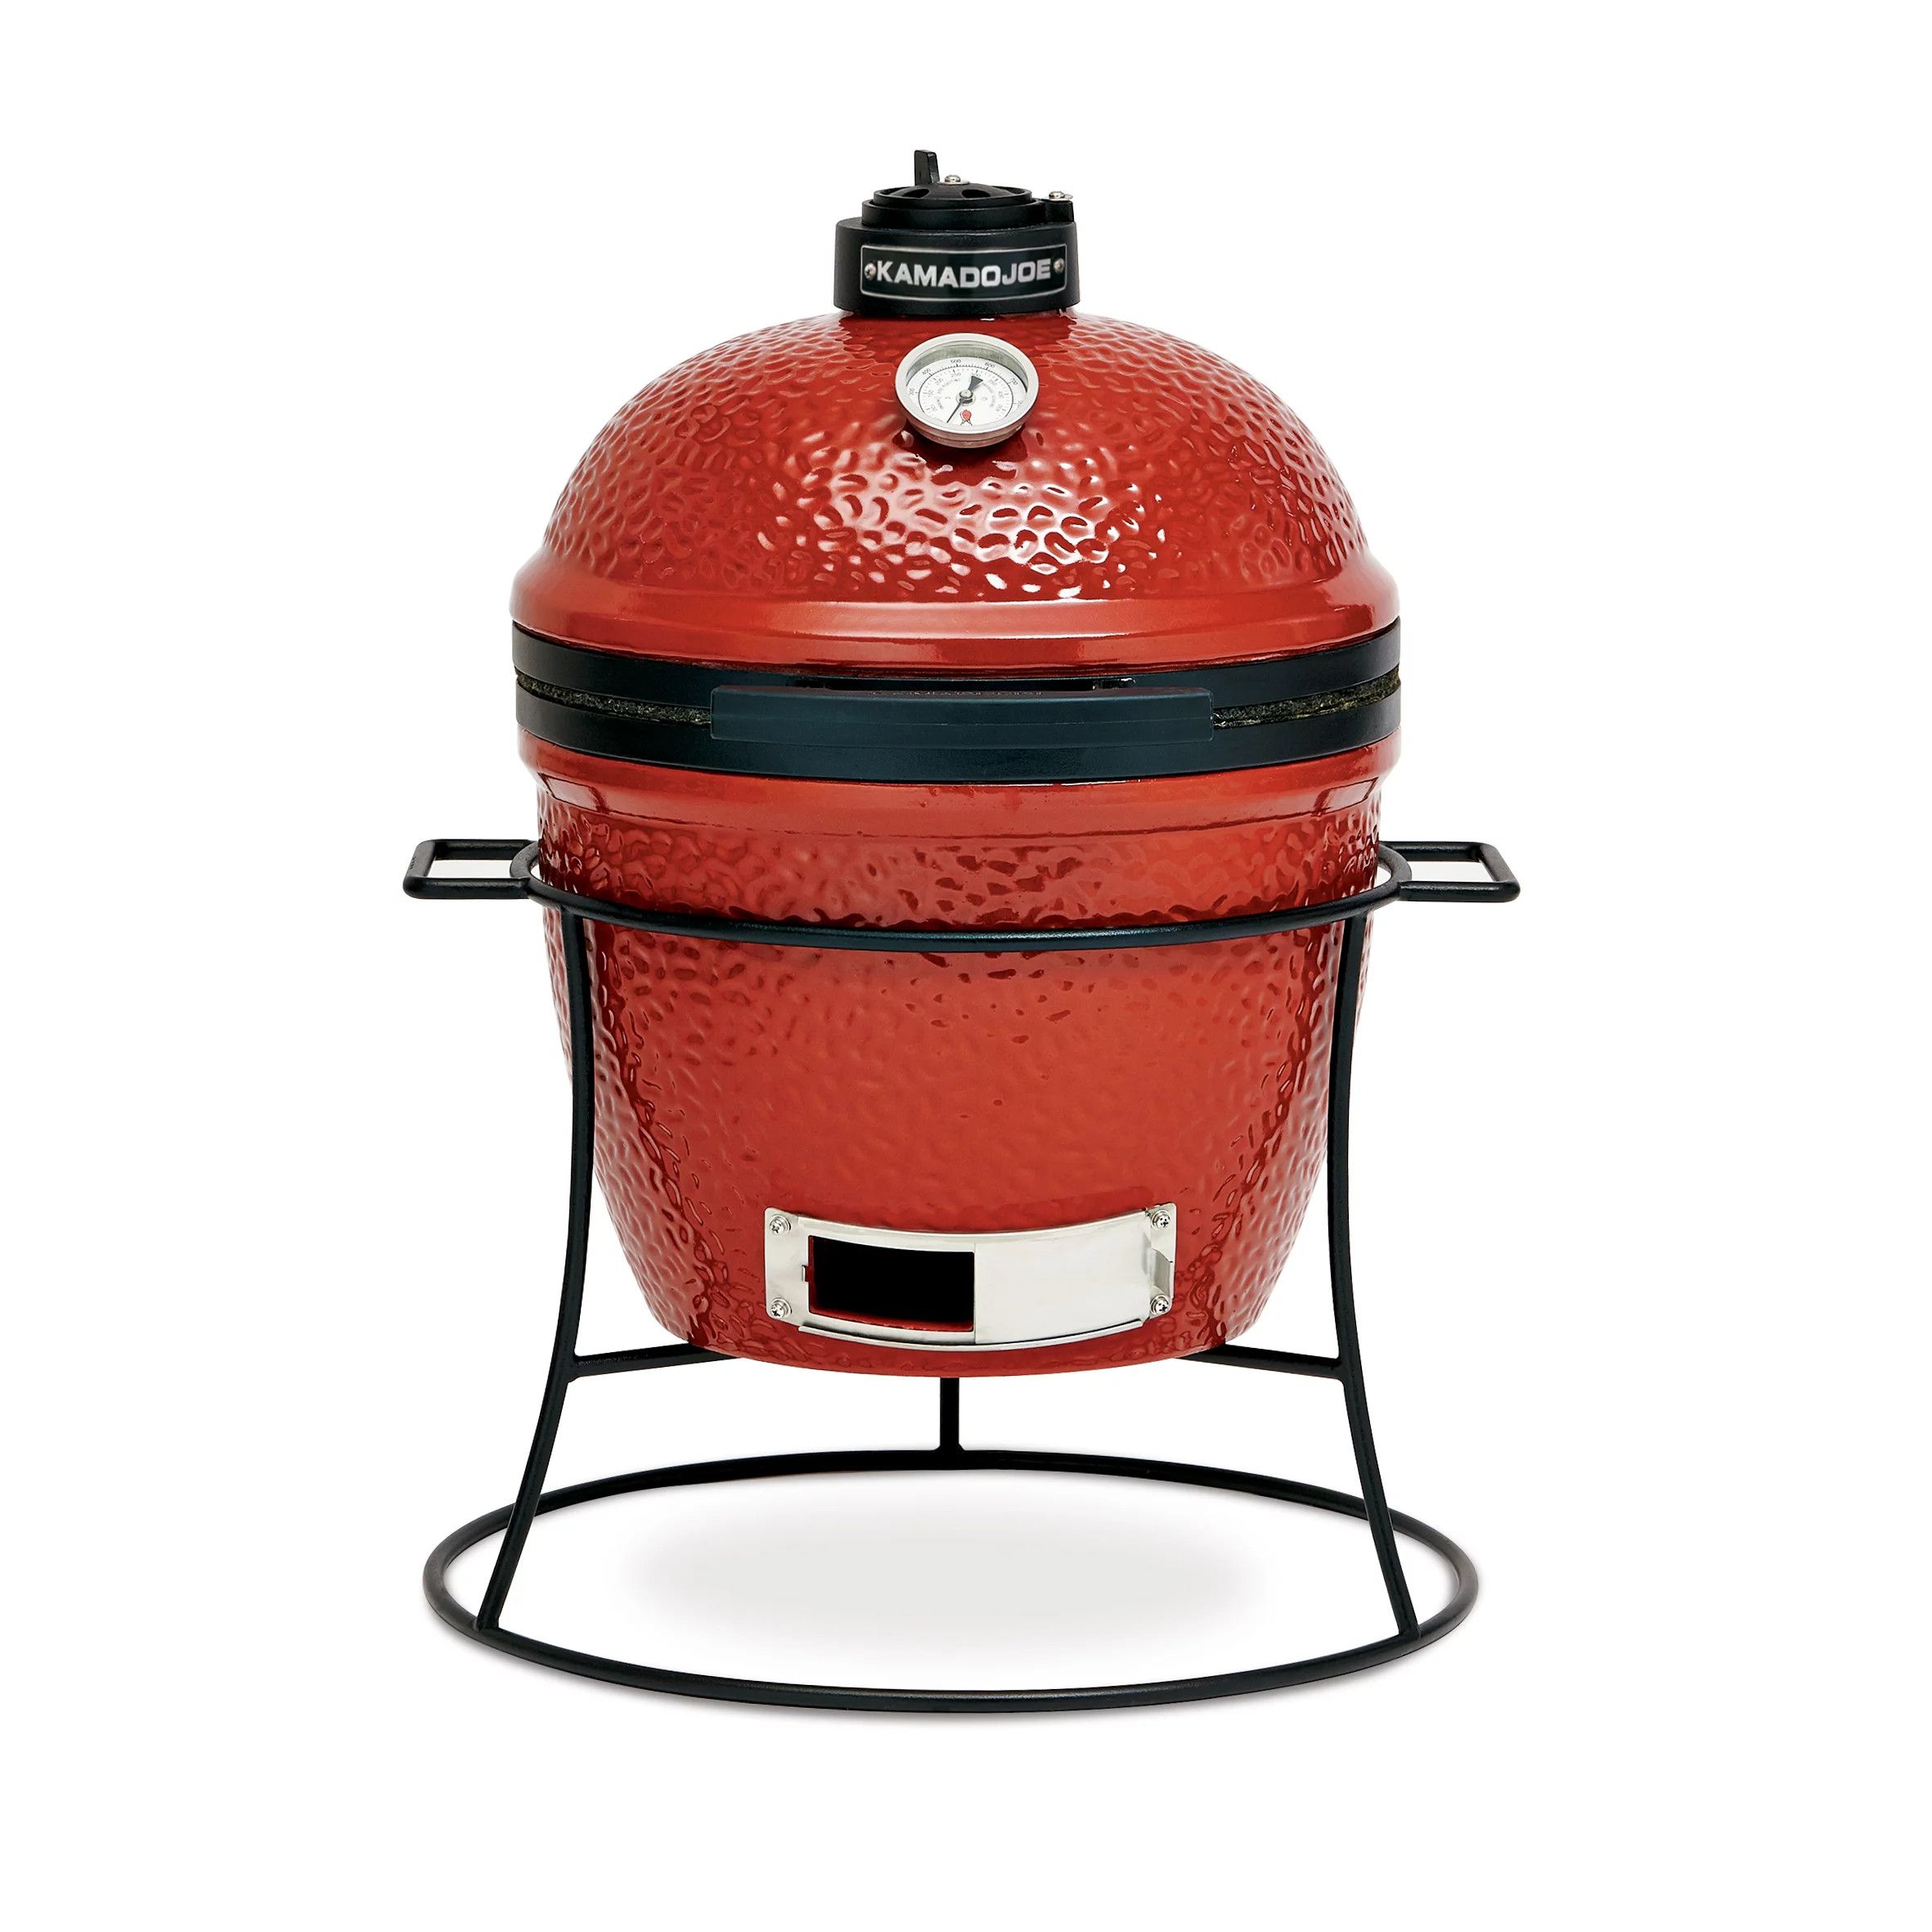 Joe Jr. 13.5 in. Portable Charcoal Grill in Red with Cast Iron Cart, Heat Deflectors and Ash Tool | Walmart (US)